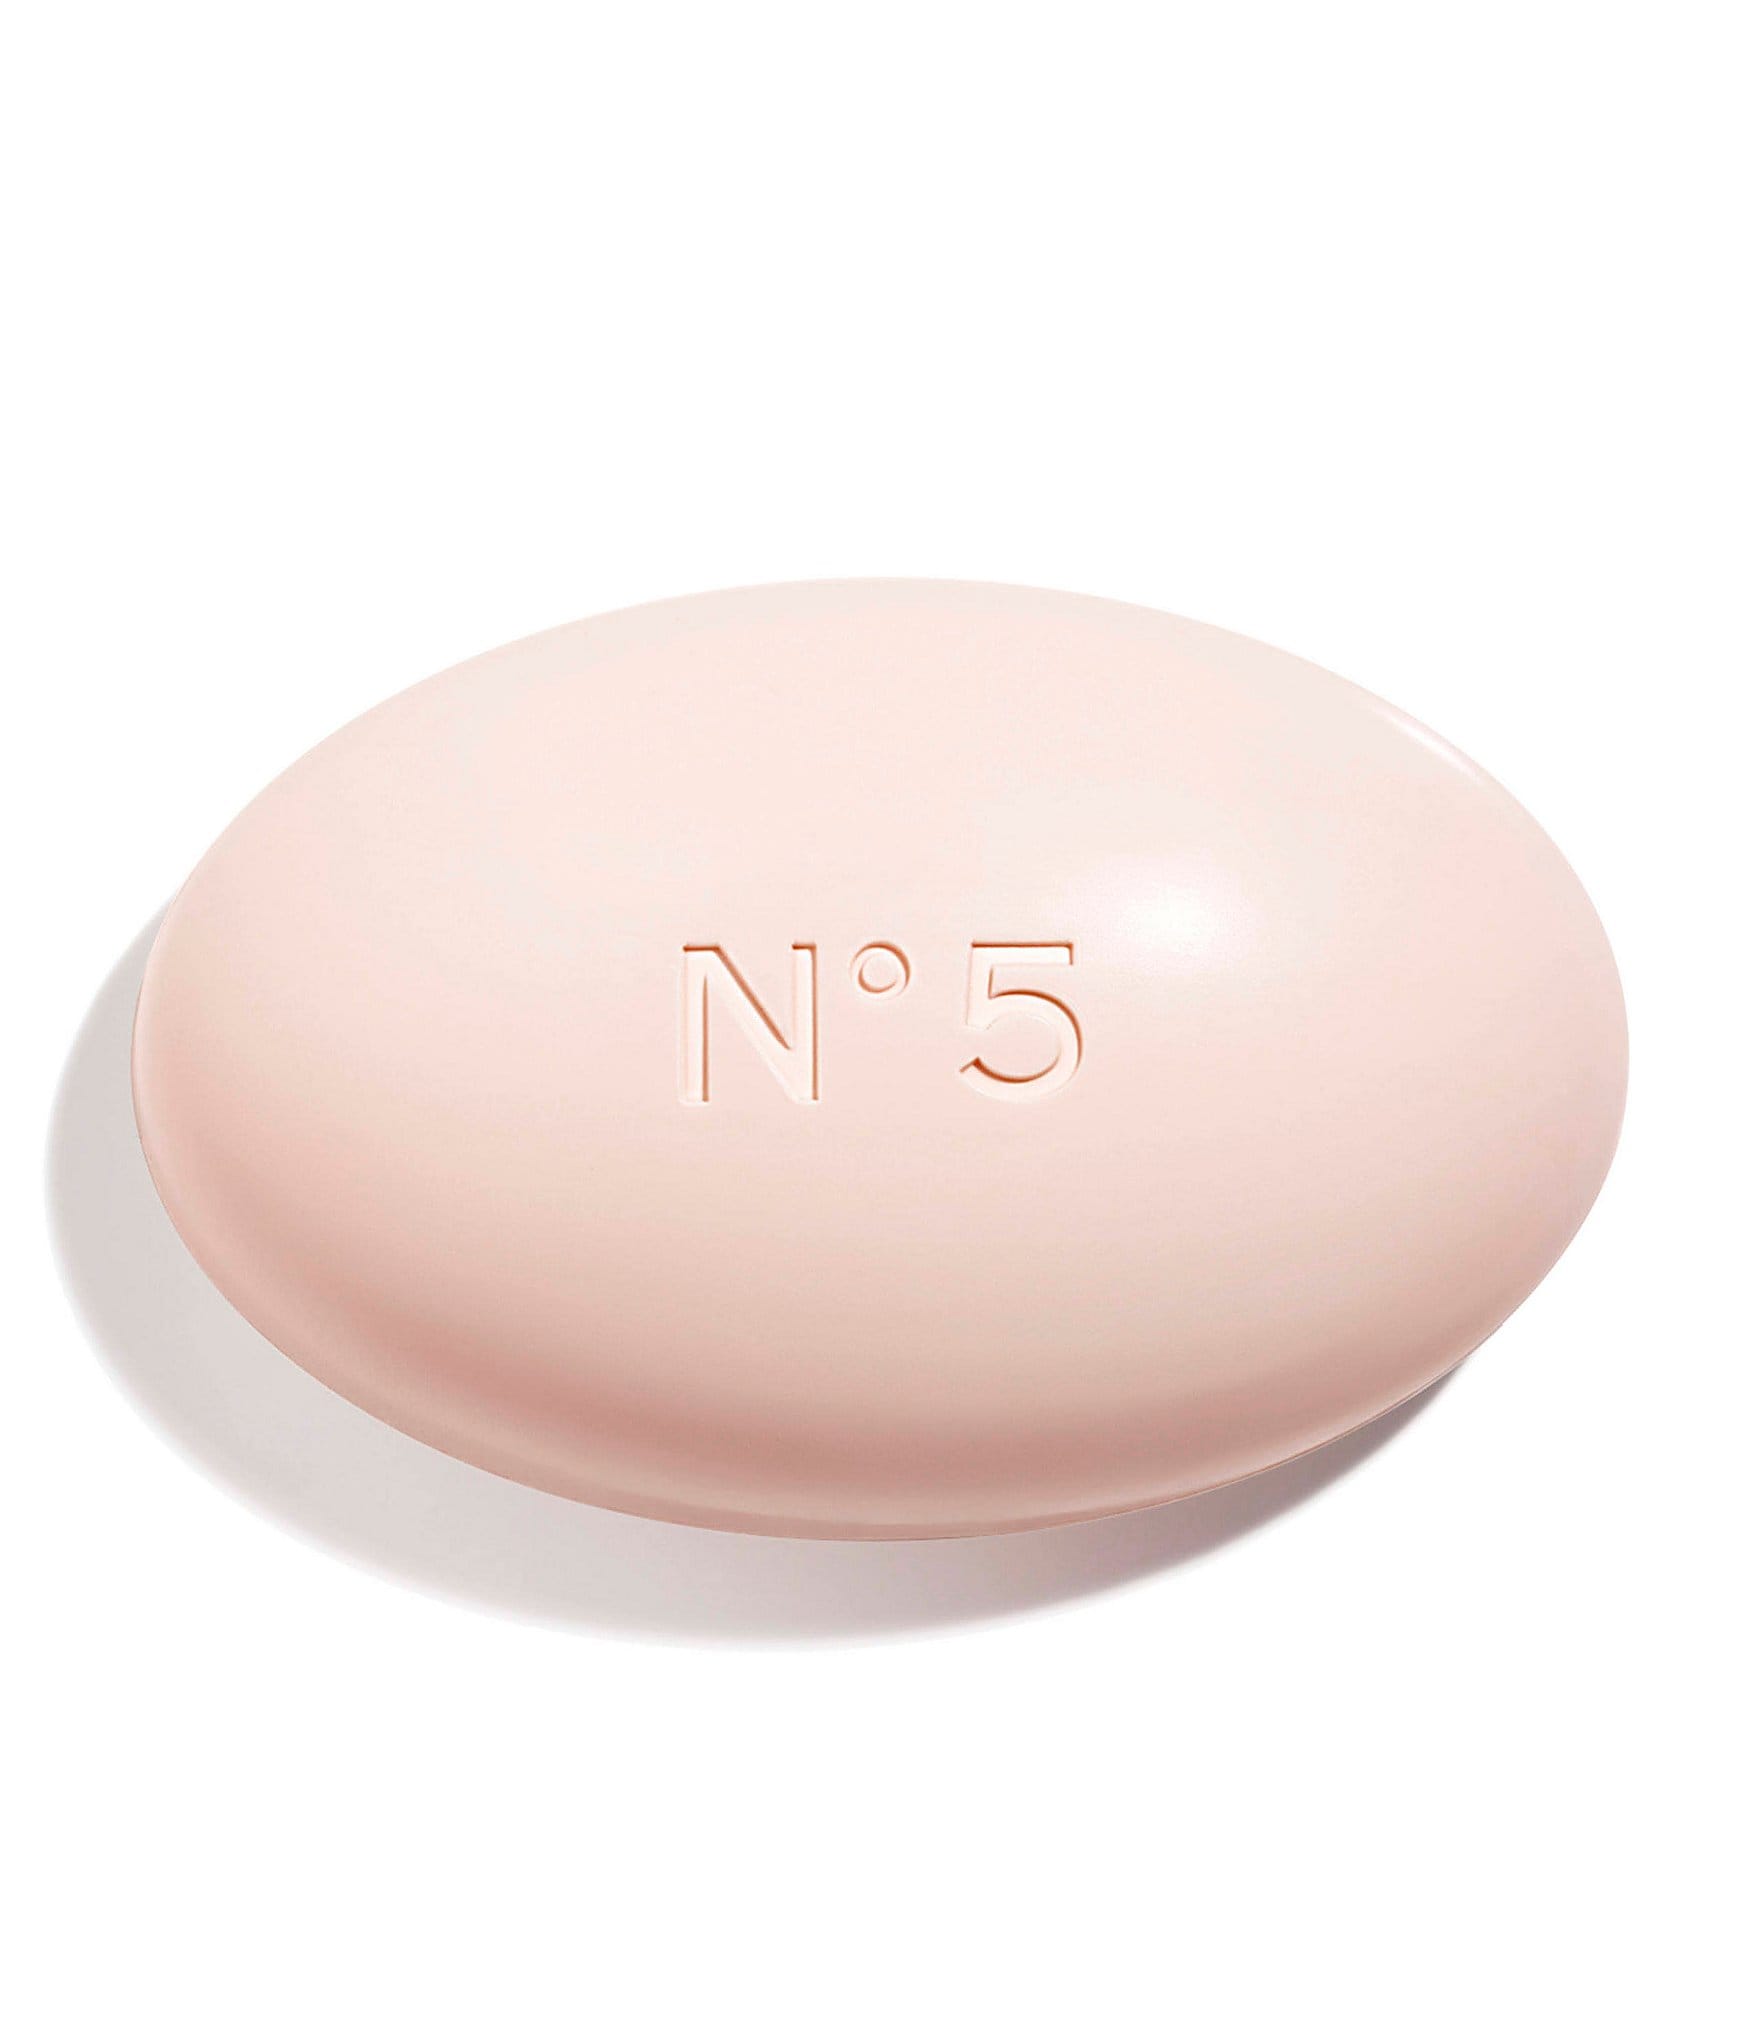 CHANEL - This is not a bottle of dish soap. It is N°5 THE